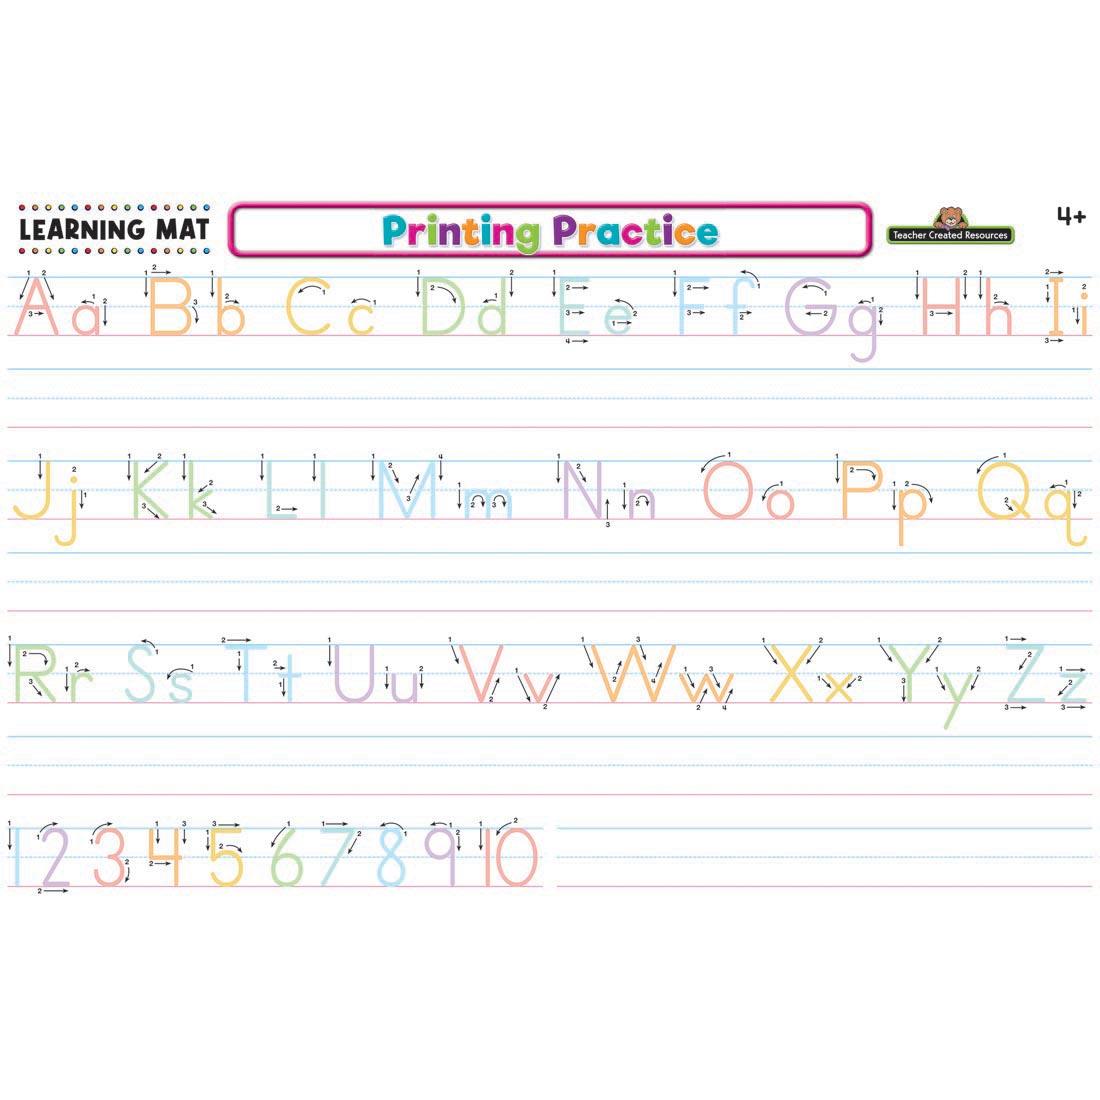 Printing Practice Dry Erase Learning Mat